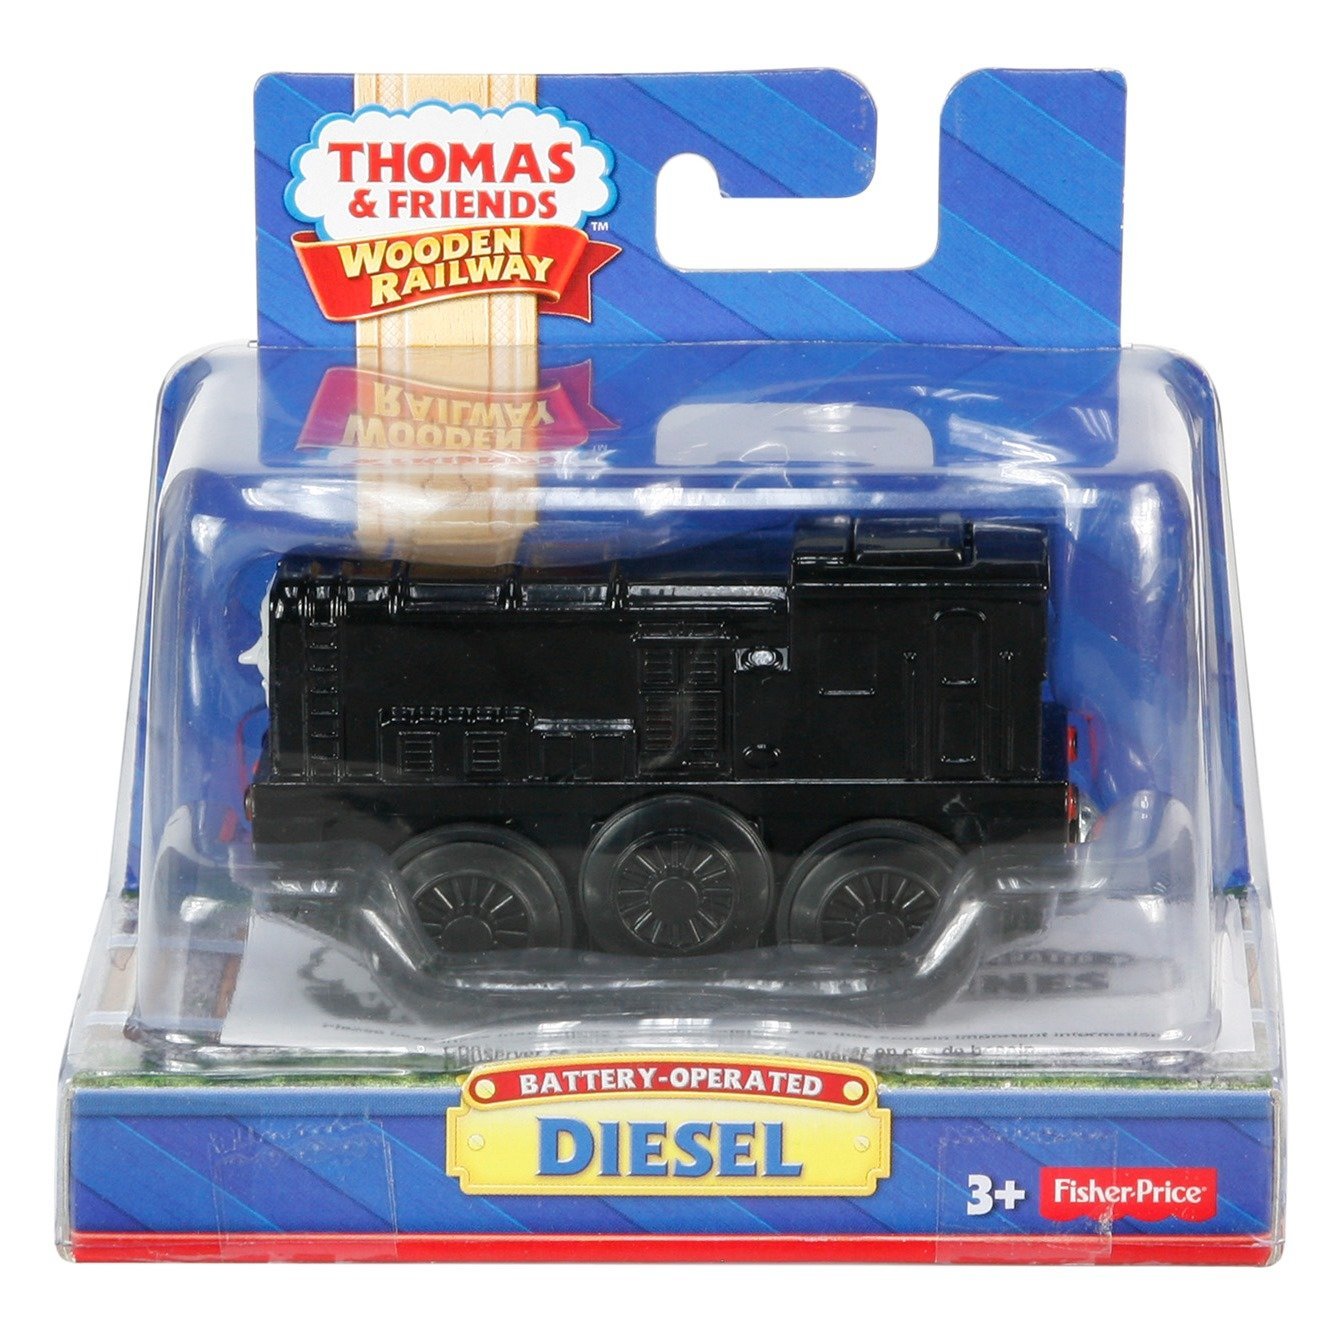 thomas wooden railway battery operated